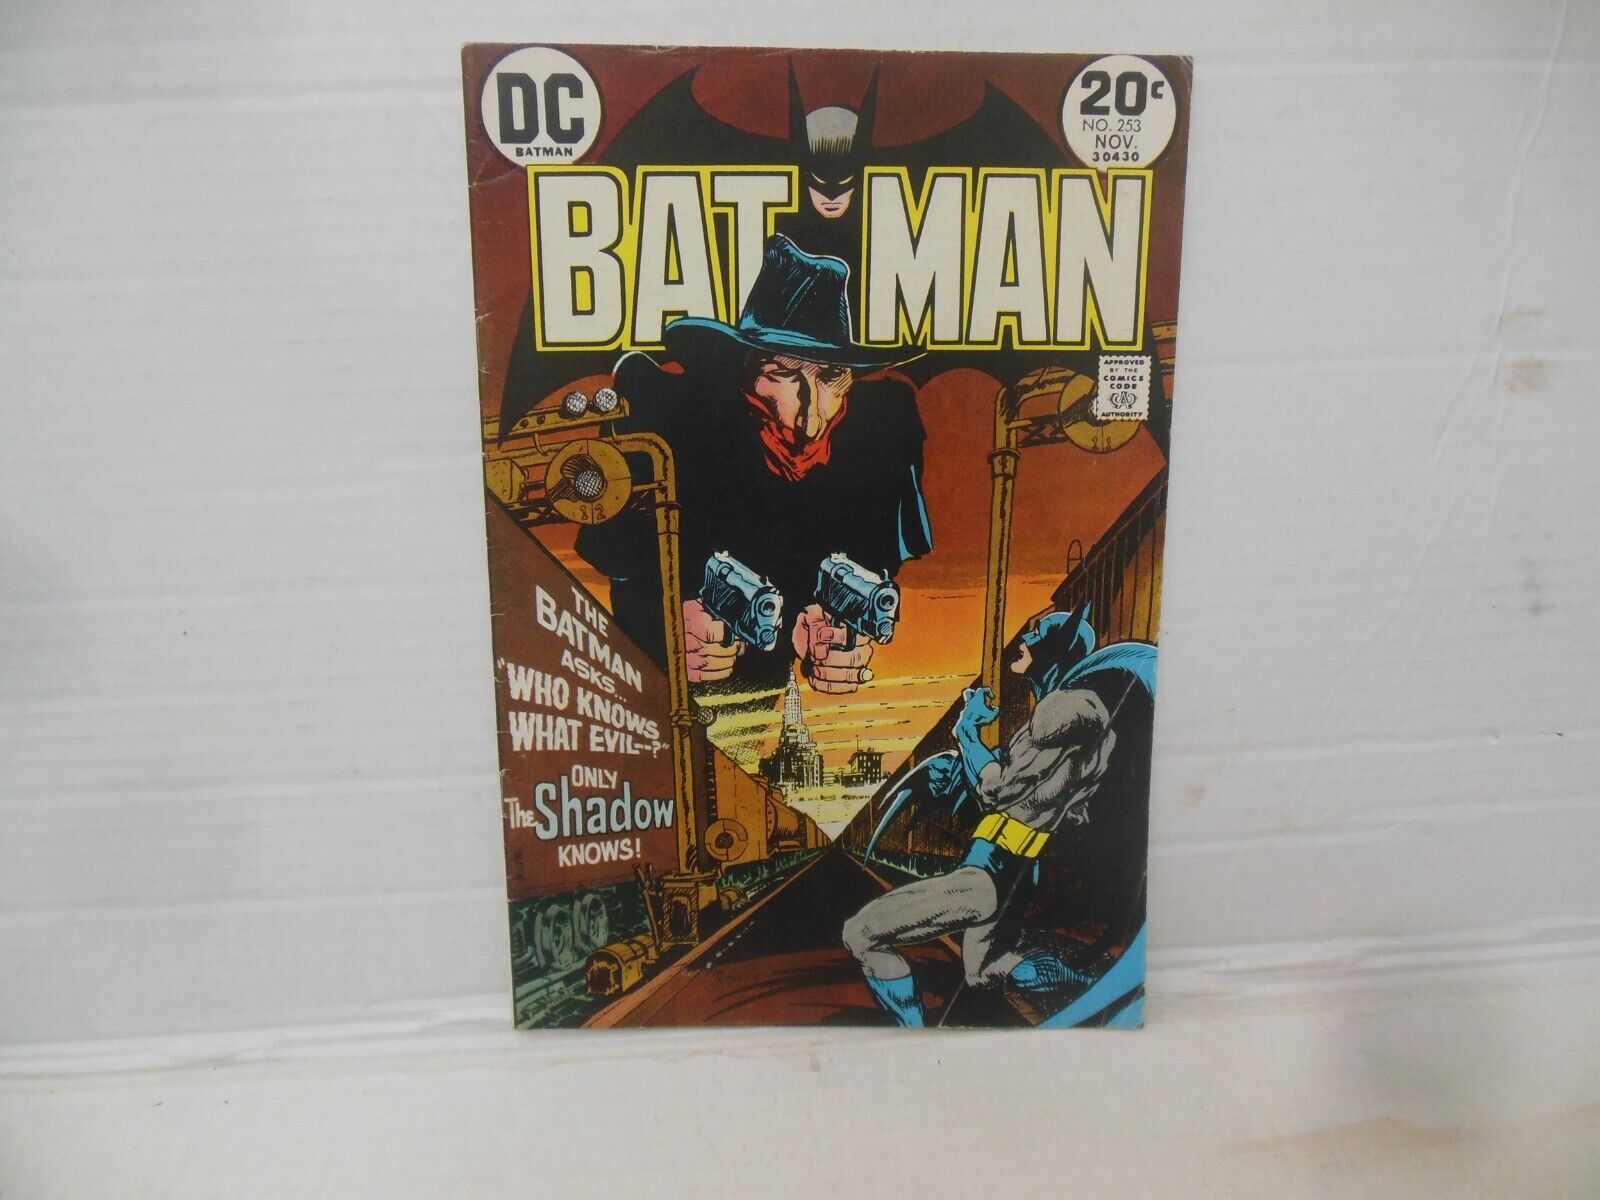 BATMAN comics #253 mid-grade from 1973 ONLY THE SHADOW KNOWS